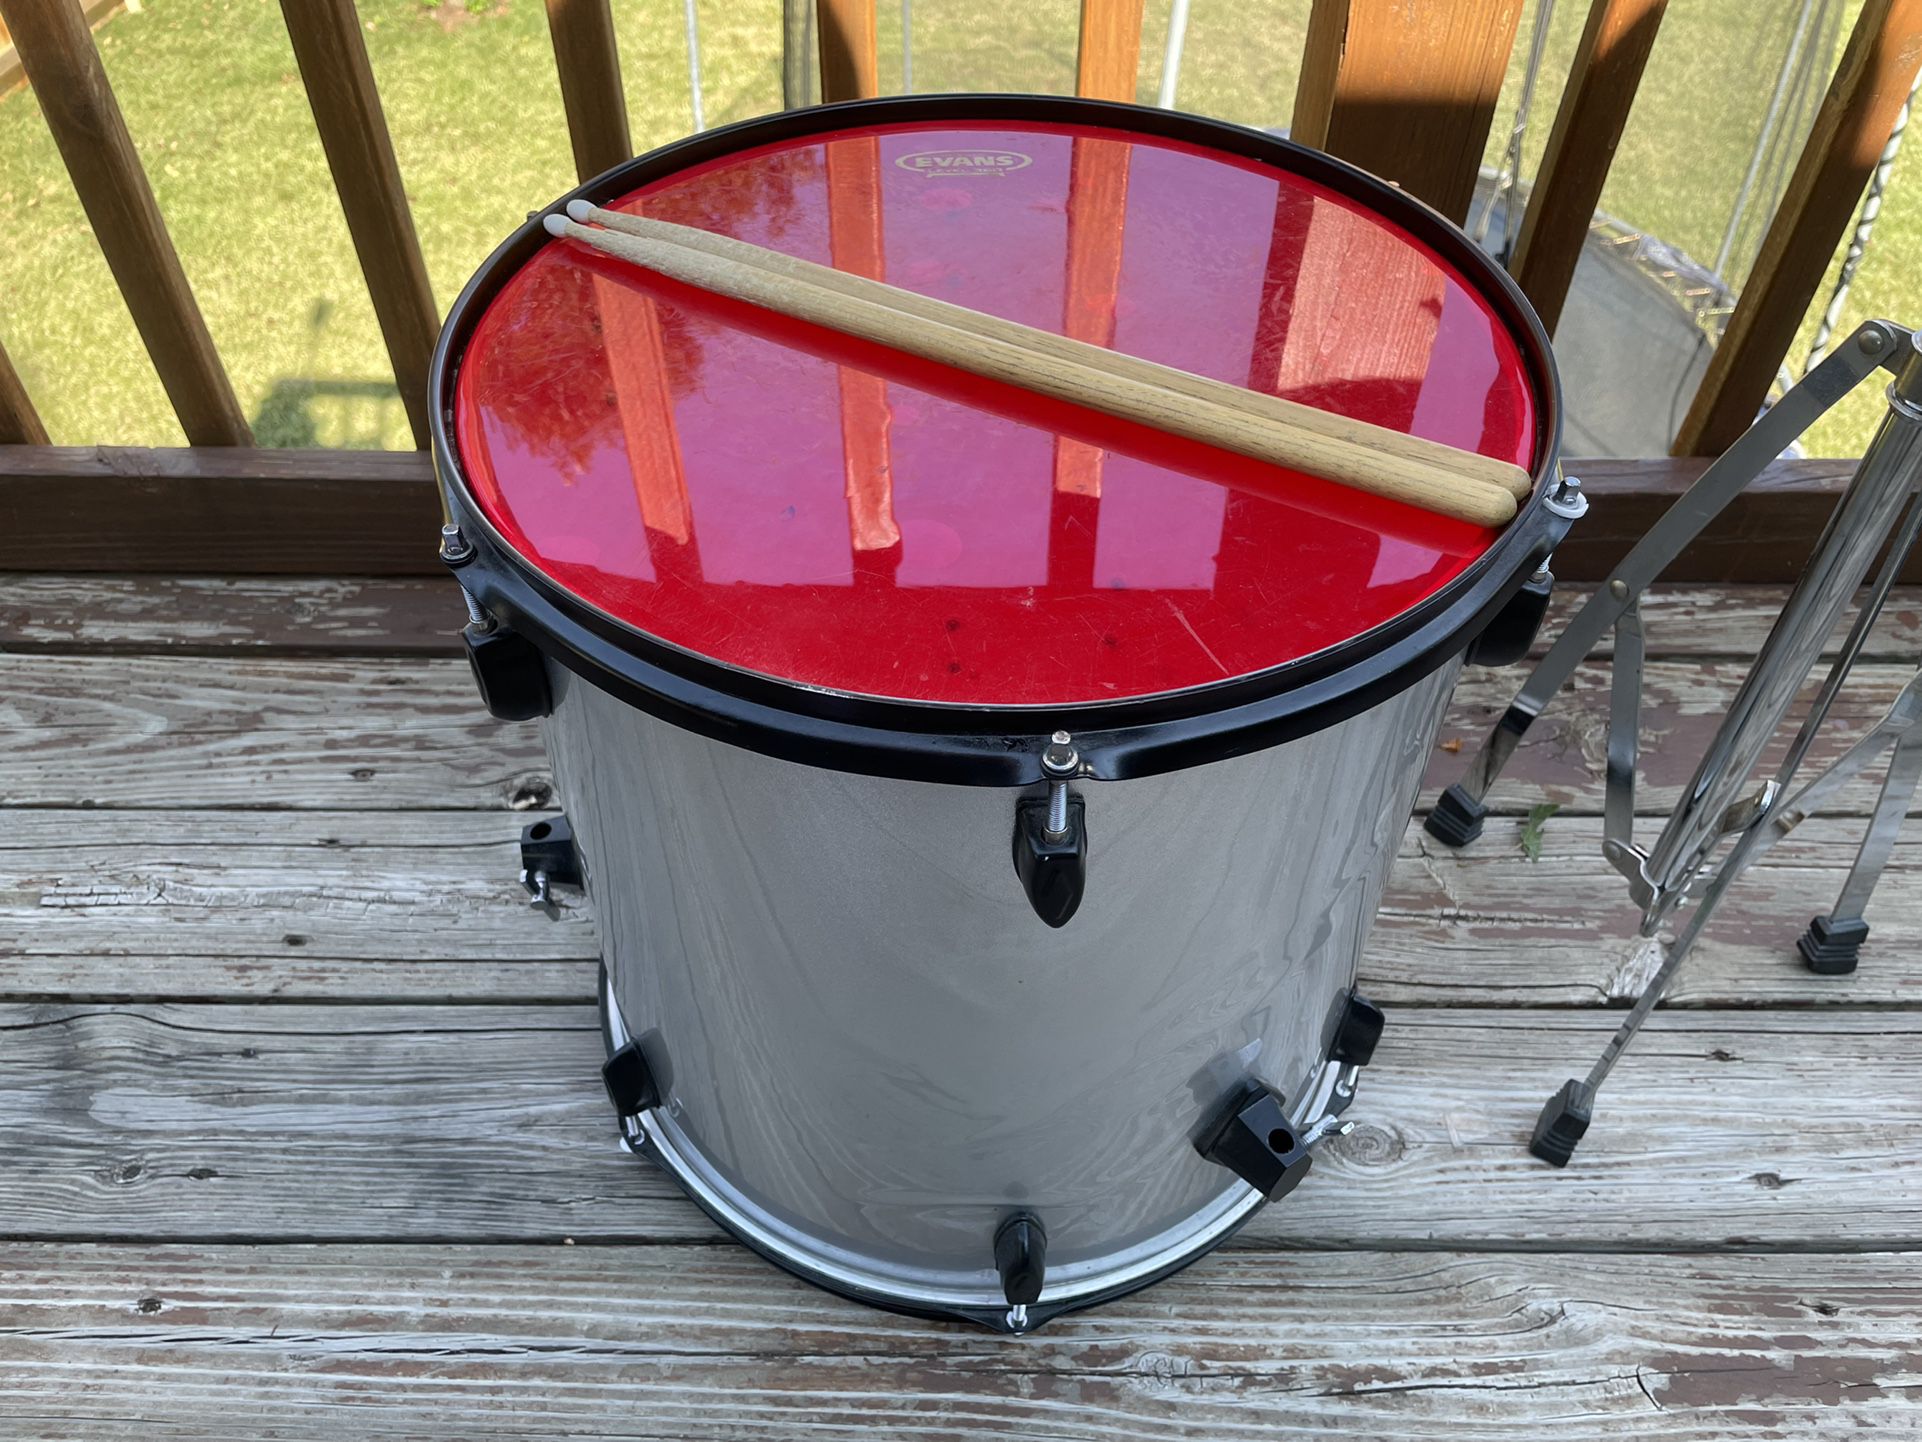 Beginner Drums. Stand Not Included